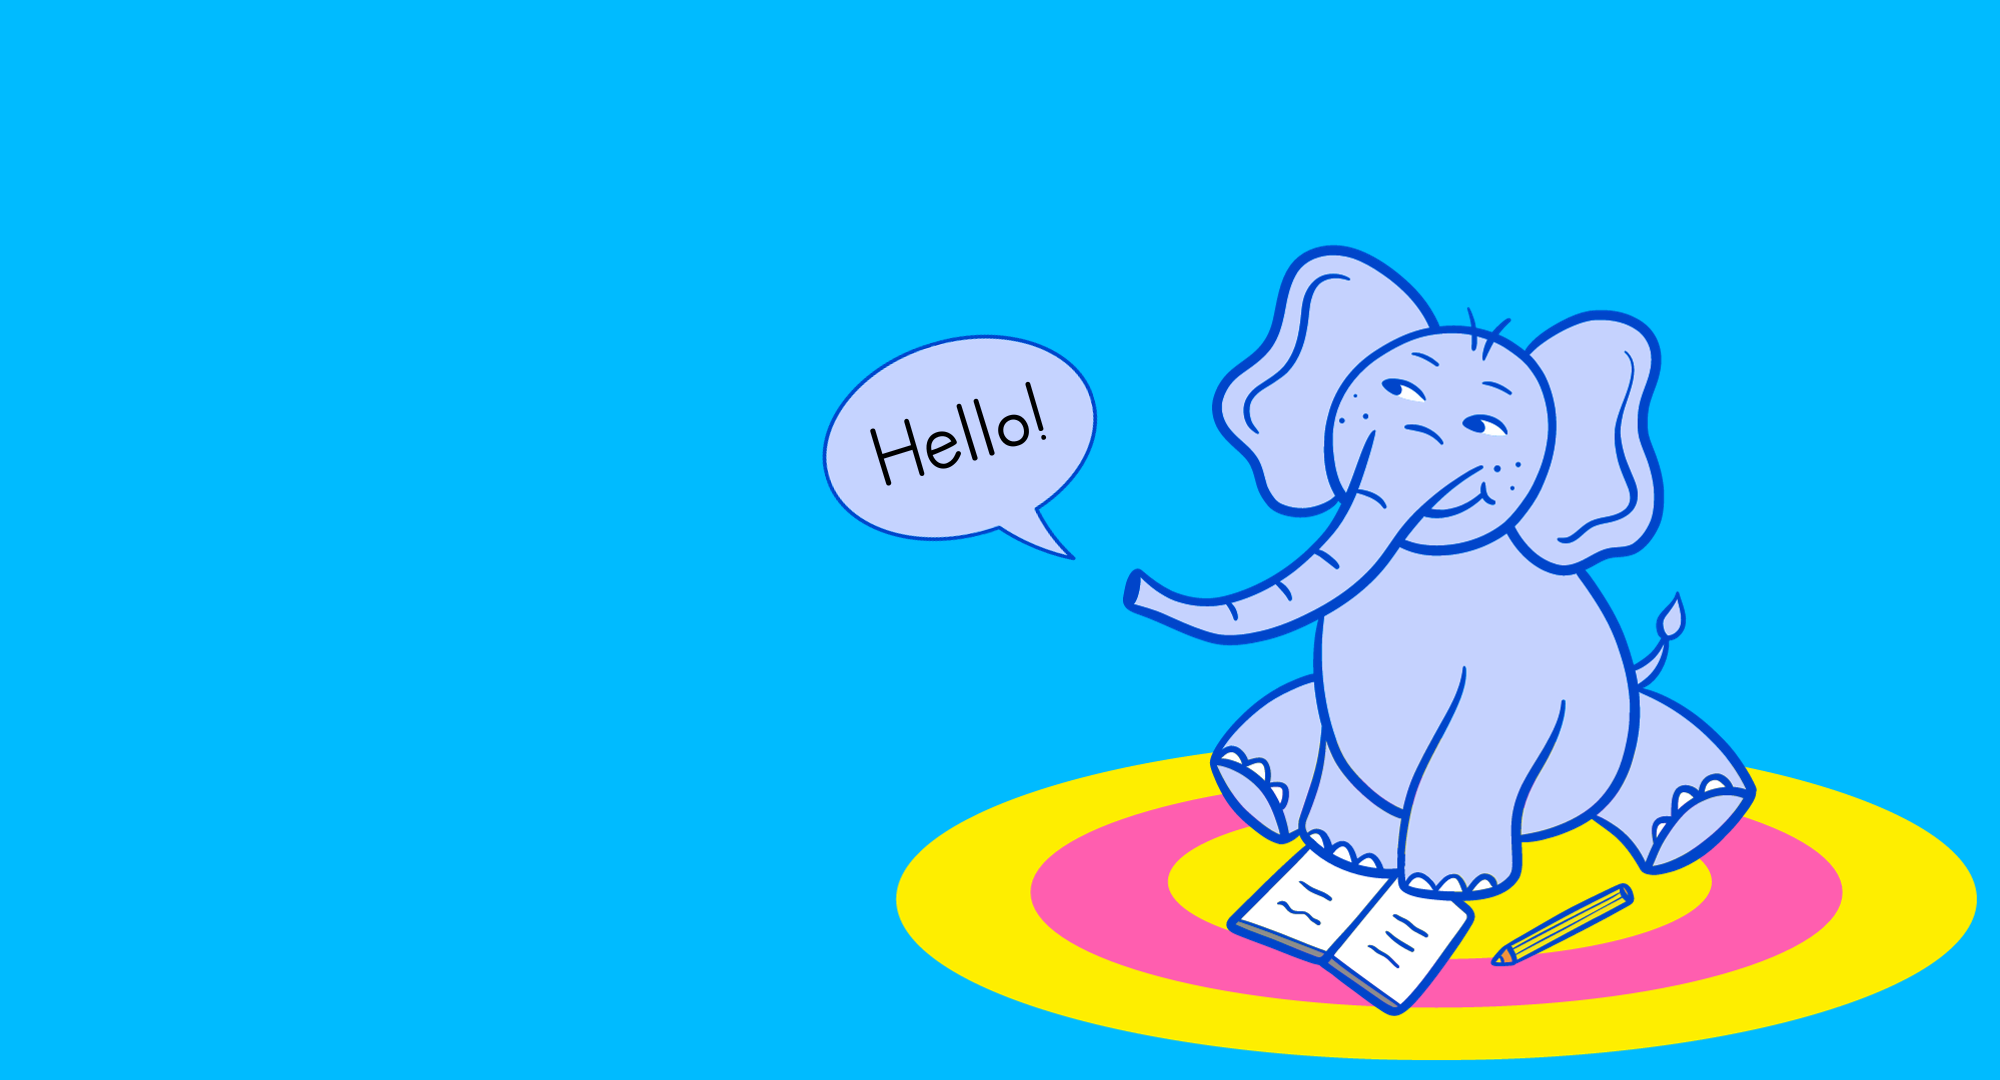 The image shows an elephant cartoon character with a pen and open book. 